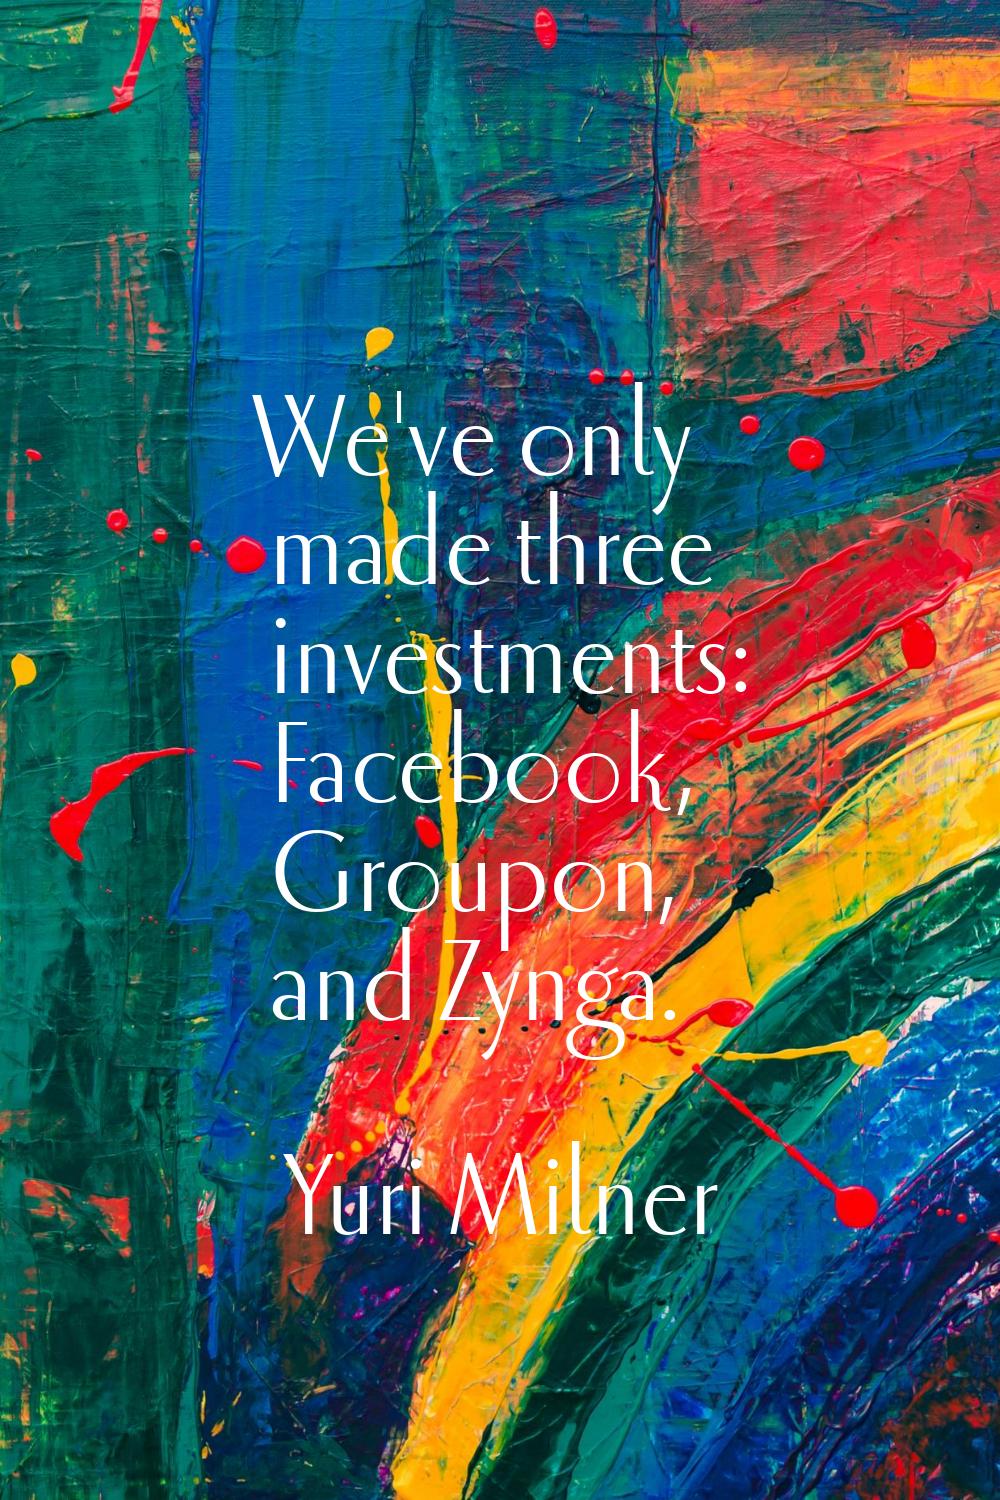 We've only made three investments: Facebook, Groupon, and Zynga.